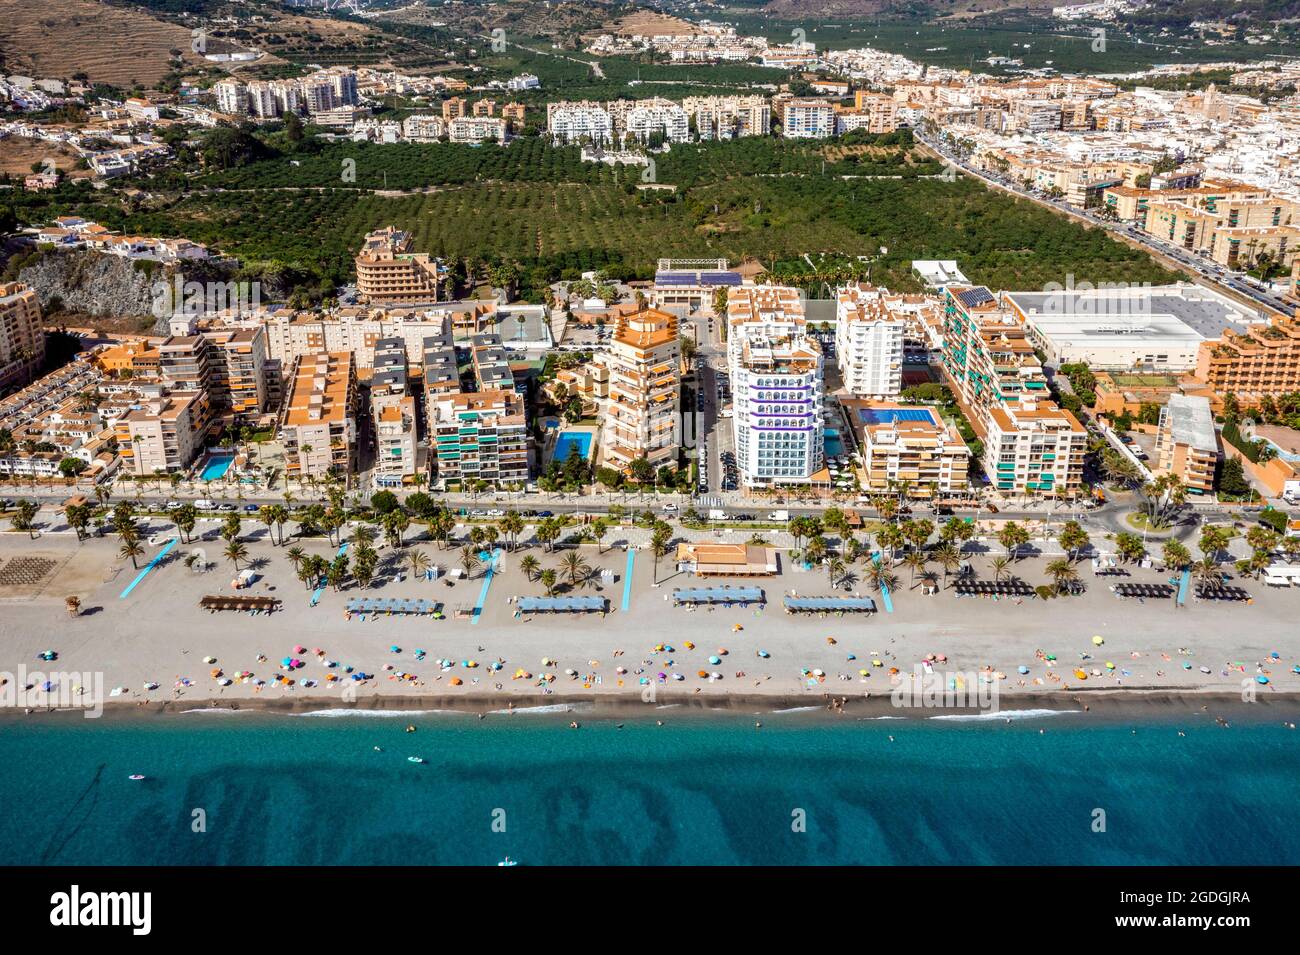 Aerial view of touristic coast in Almunecar by Mediterranean Sea, Andalusia, Spain Stock Photo